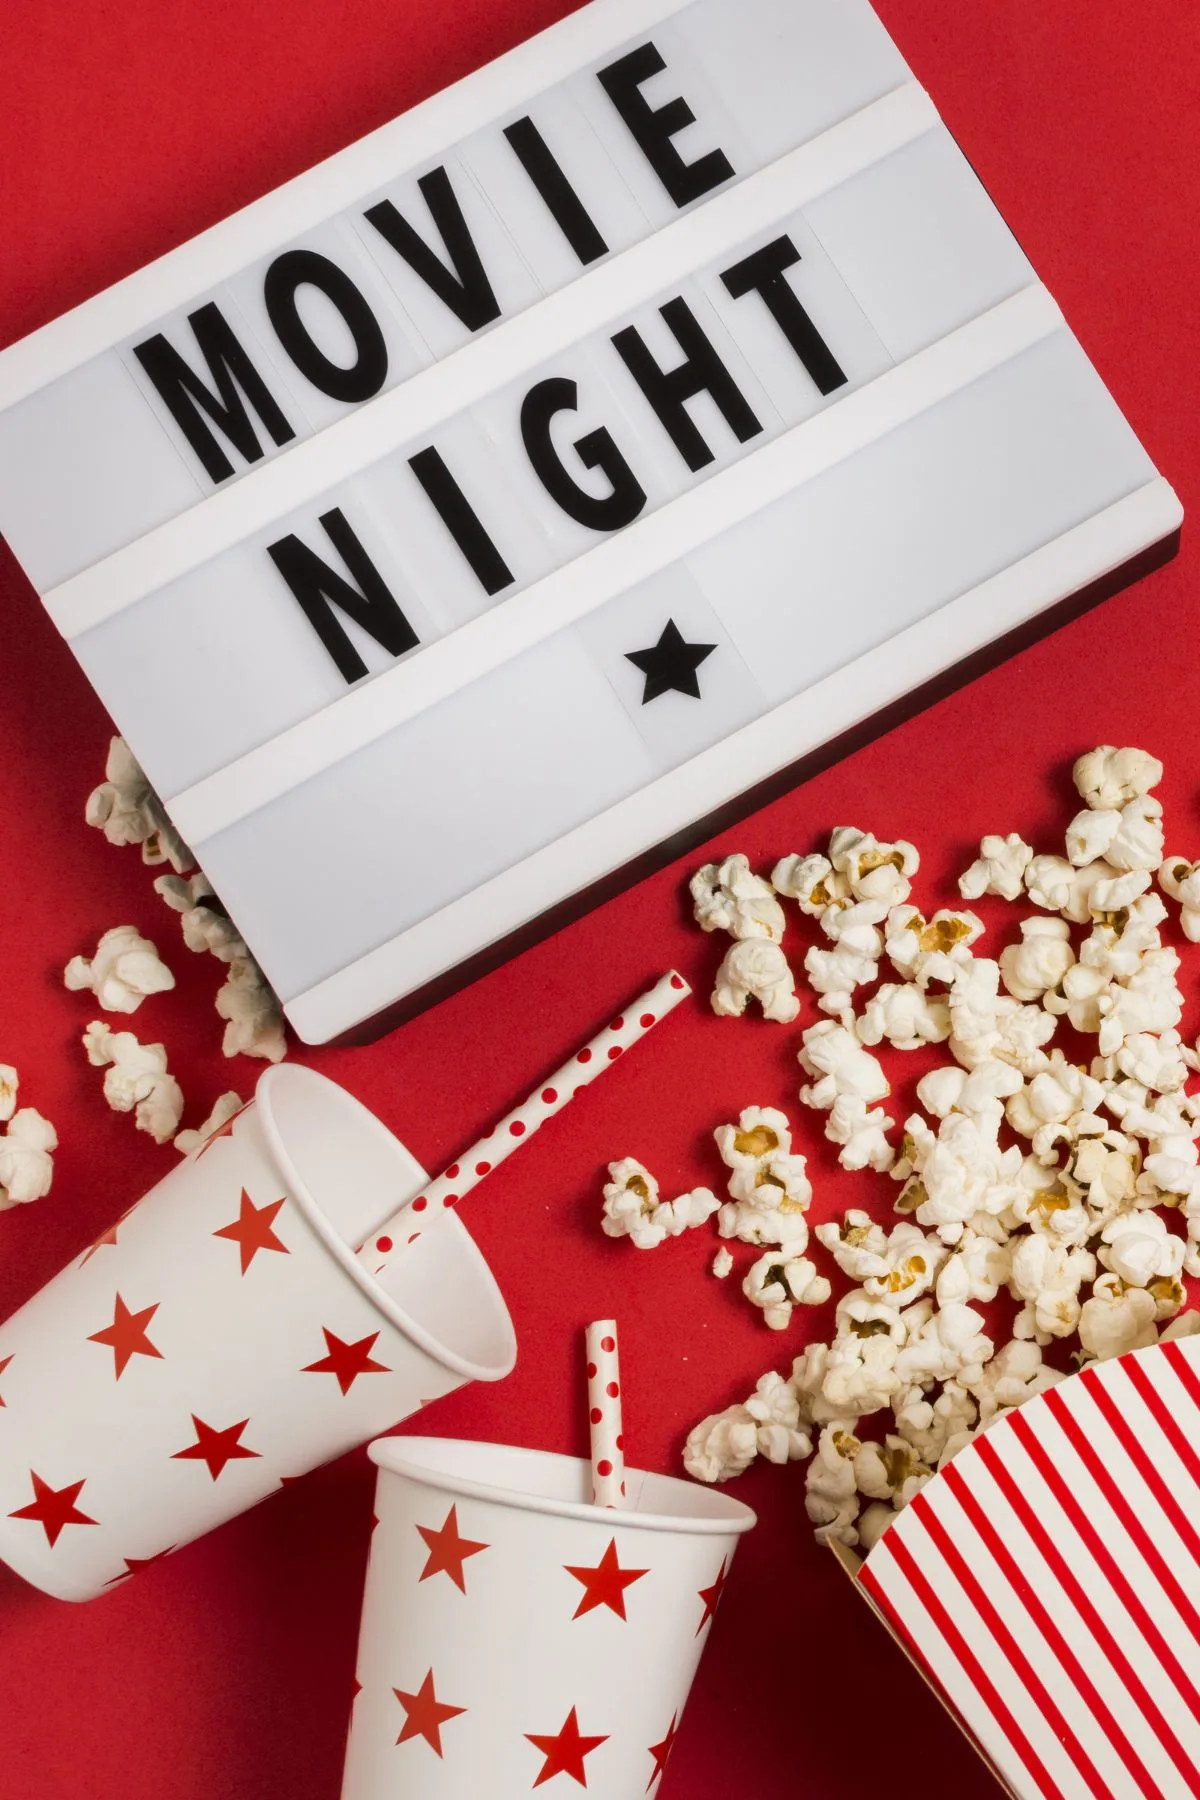 Movie night sign on a red background with a bag of popcorn and drinks.